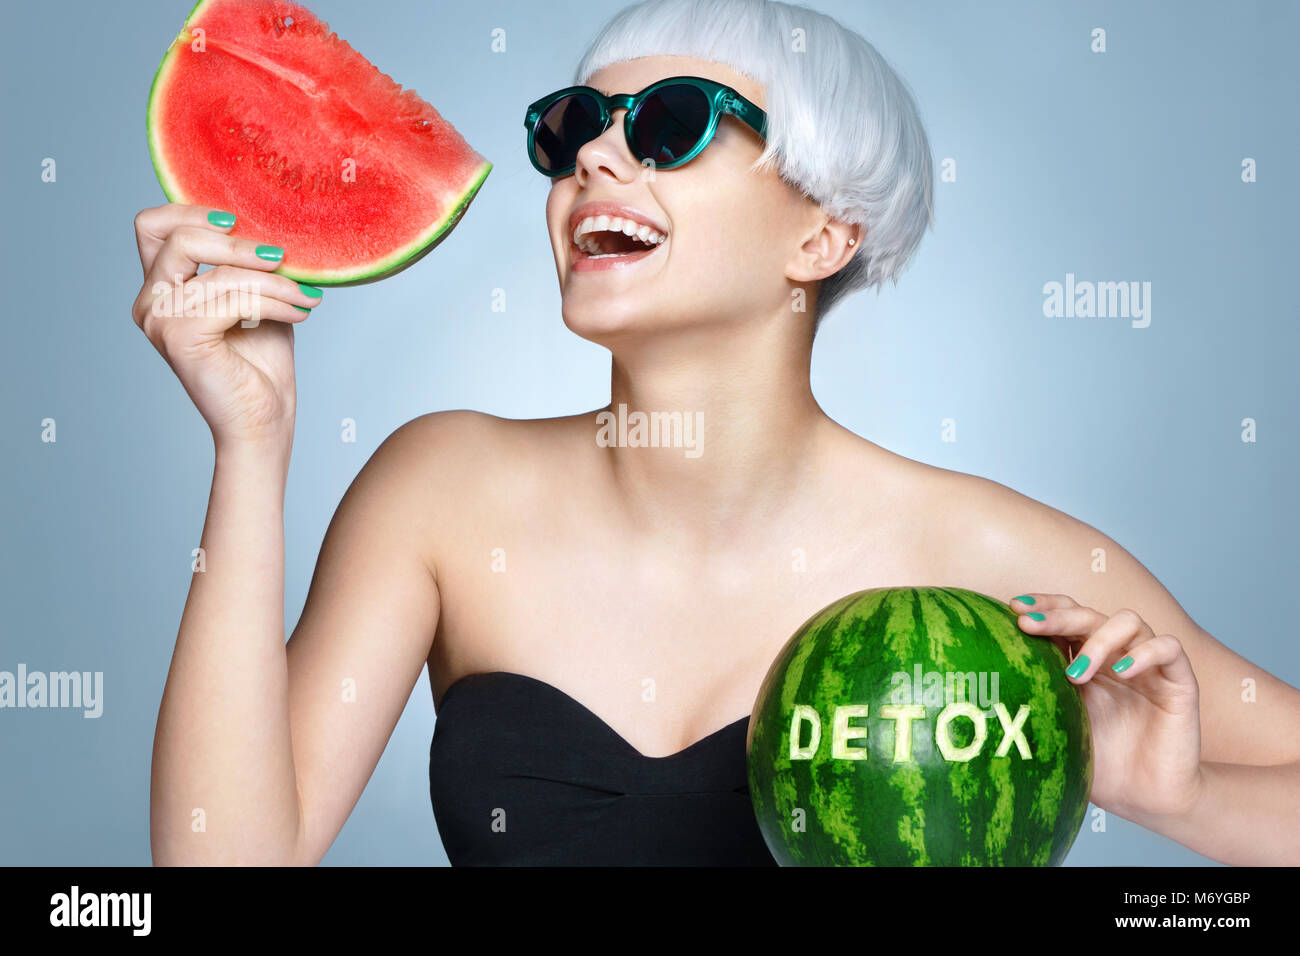 Happy girl with ripe watermelon. Photo of smiling girl in sunglasses on blue background. Detox concept Stock Photo